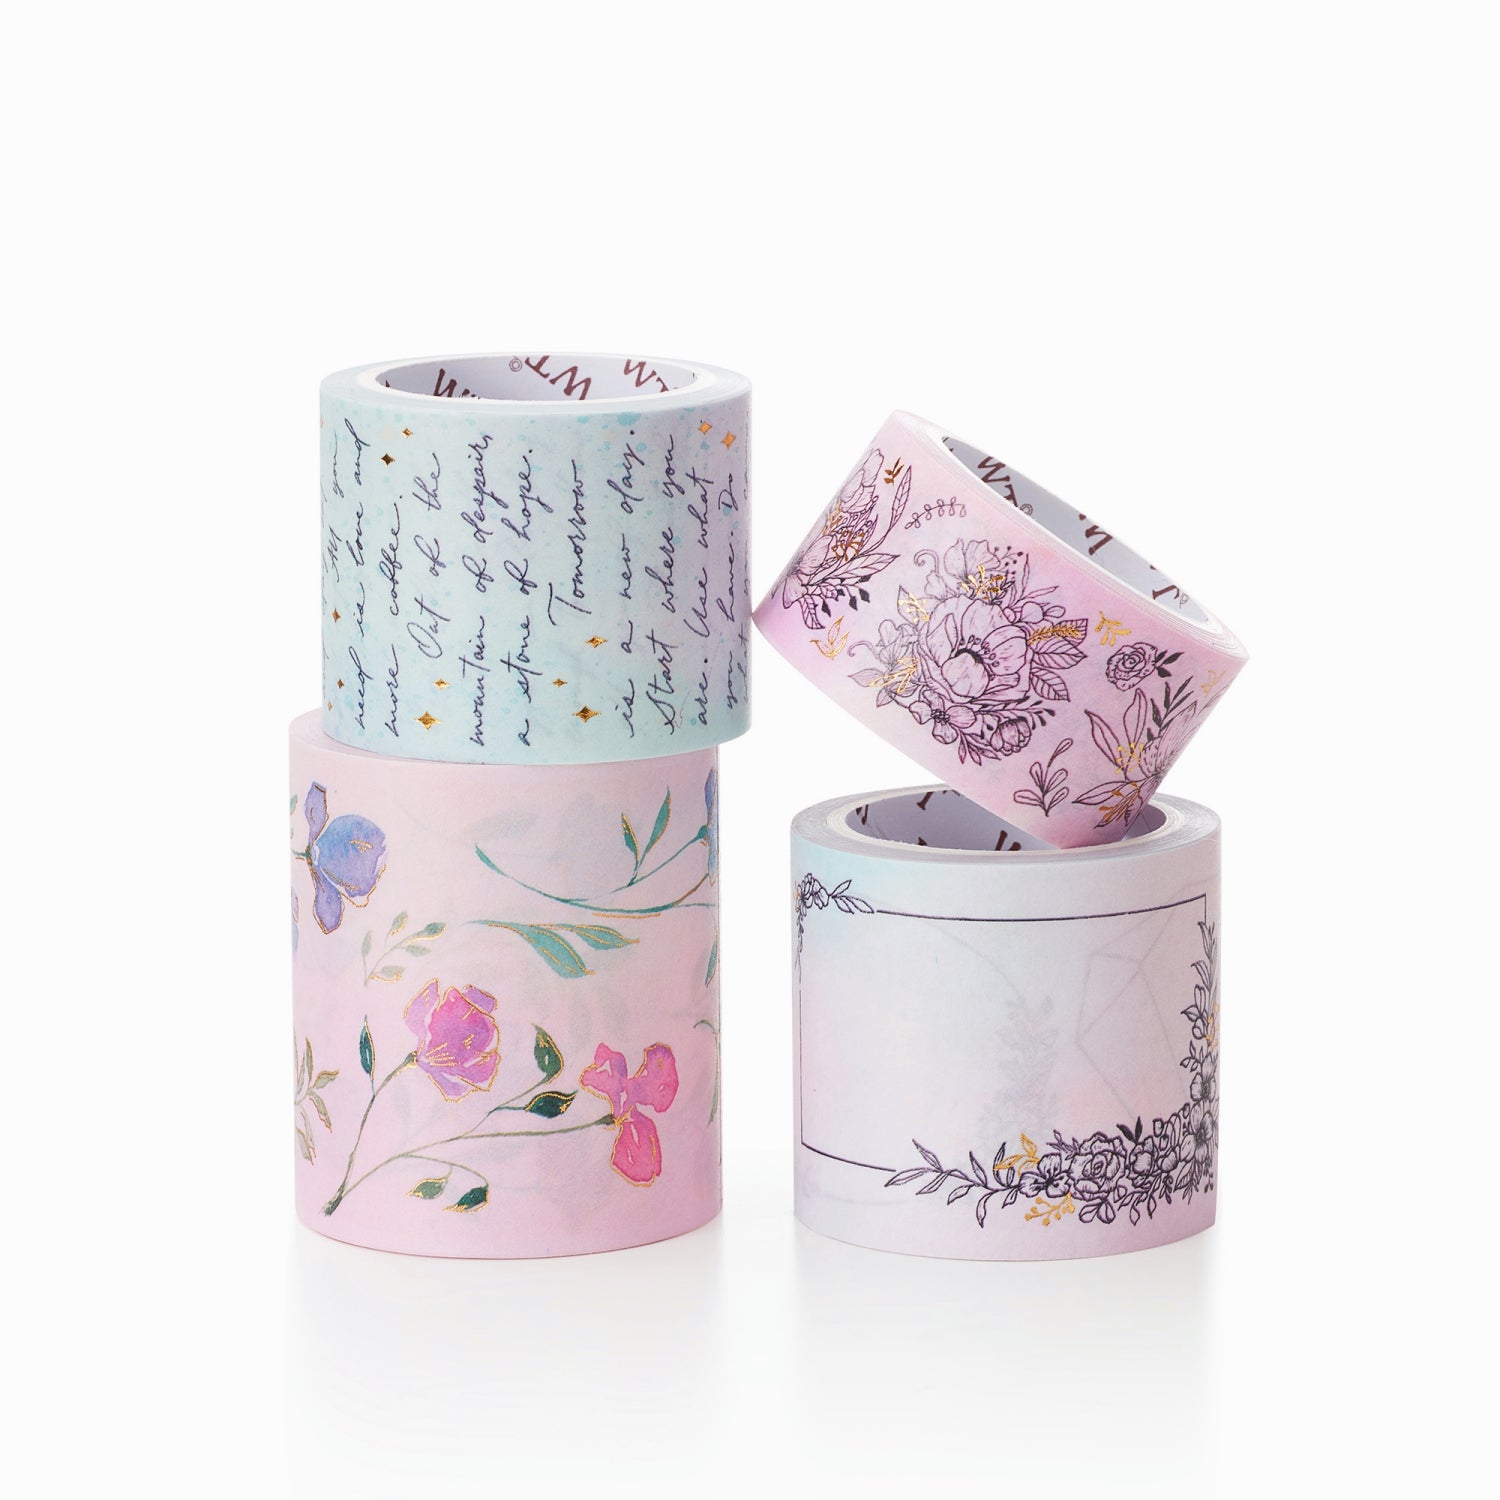 Elegant Floral Pastel Washi Tape Set | The Washi Tape Shop. Beautiful Washi and Decorative Tape For Bullet Journals, Gift Wrapping, Planner Decoration and DIY Projects